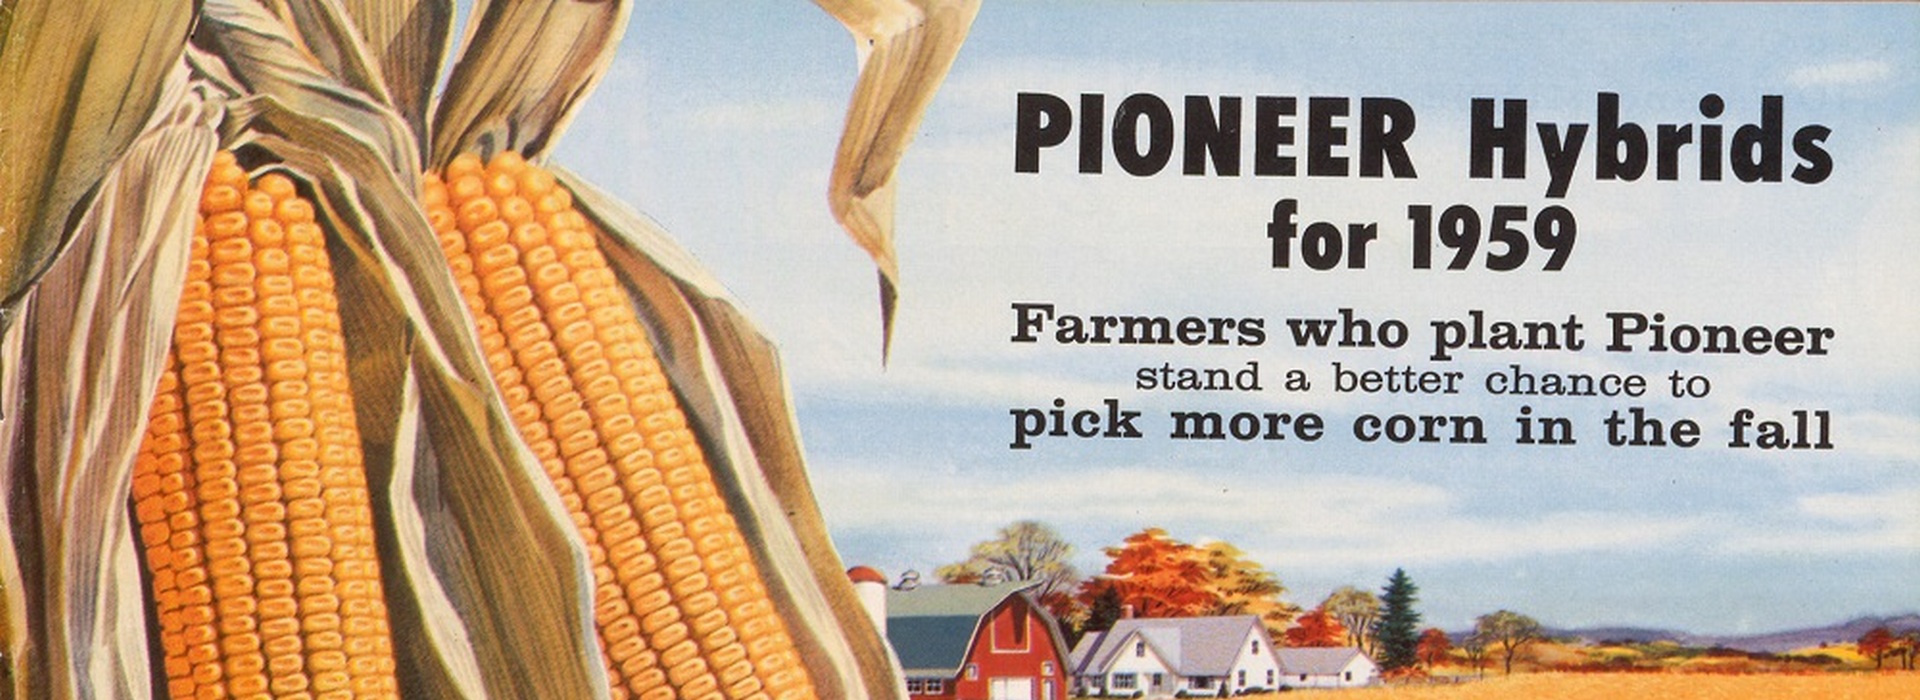 The Pioneer® Brand Celebrates 97 Years of Corn Hybridization Experience